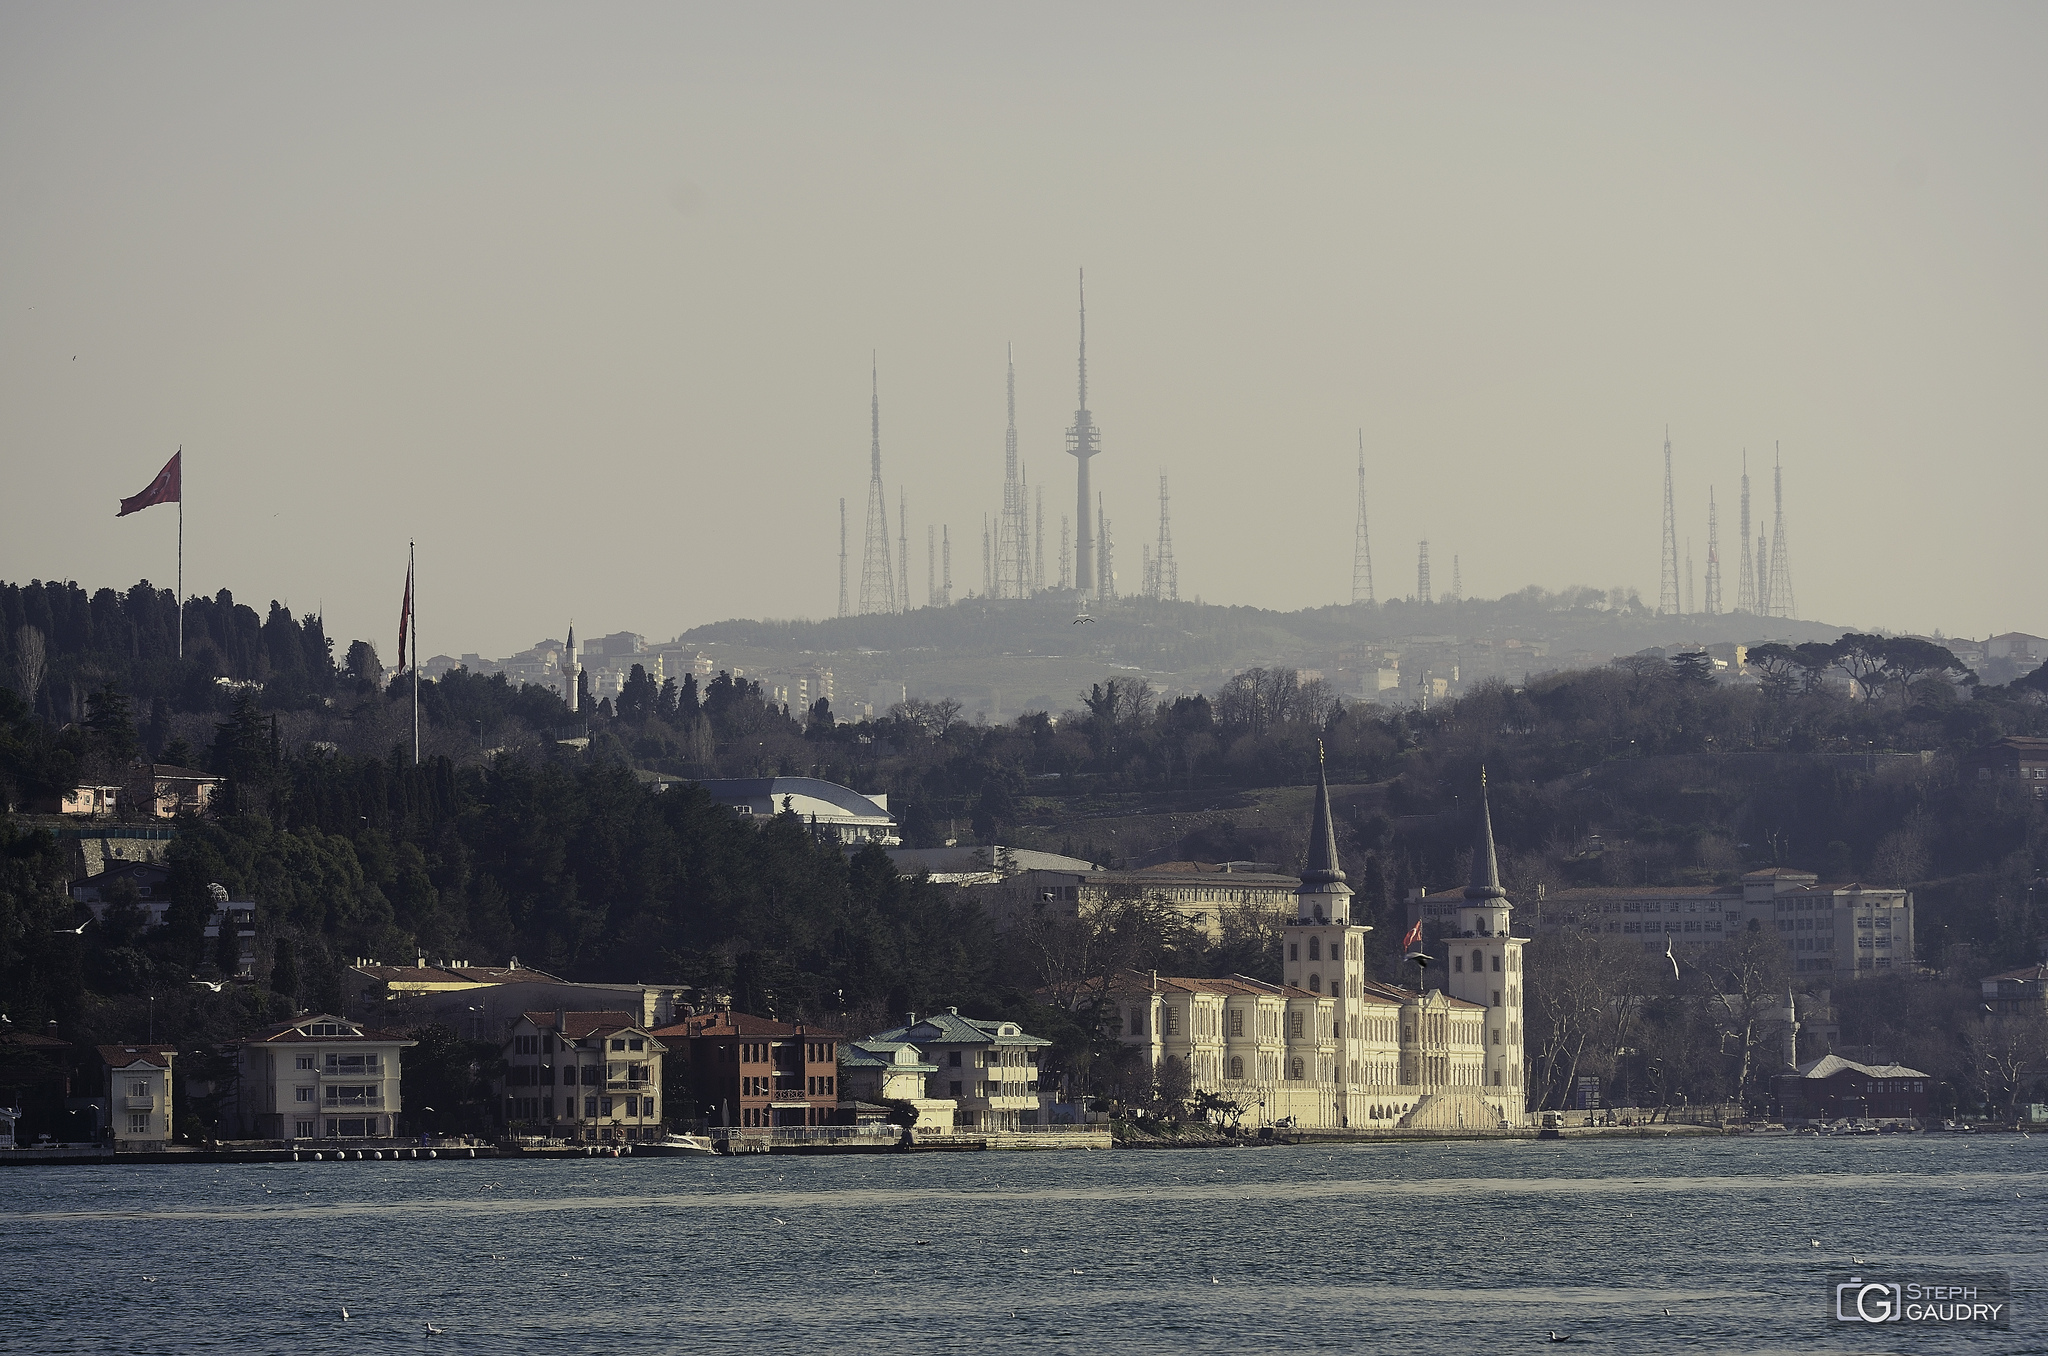 Bosphorus and forest of antennas [Click to start slideshow]